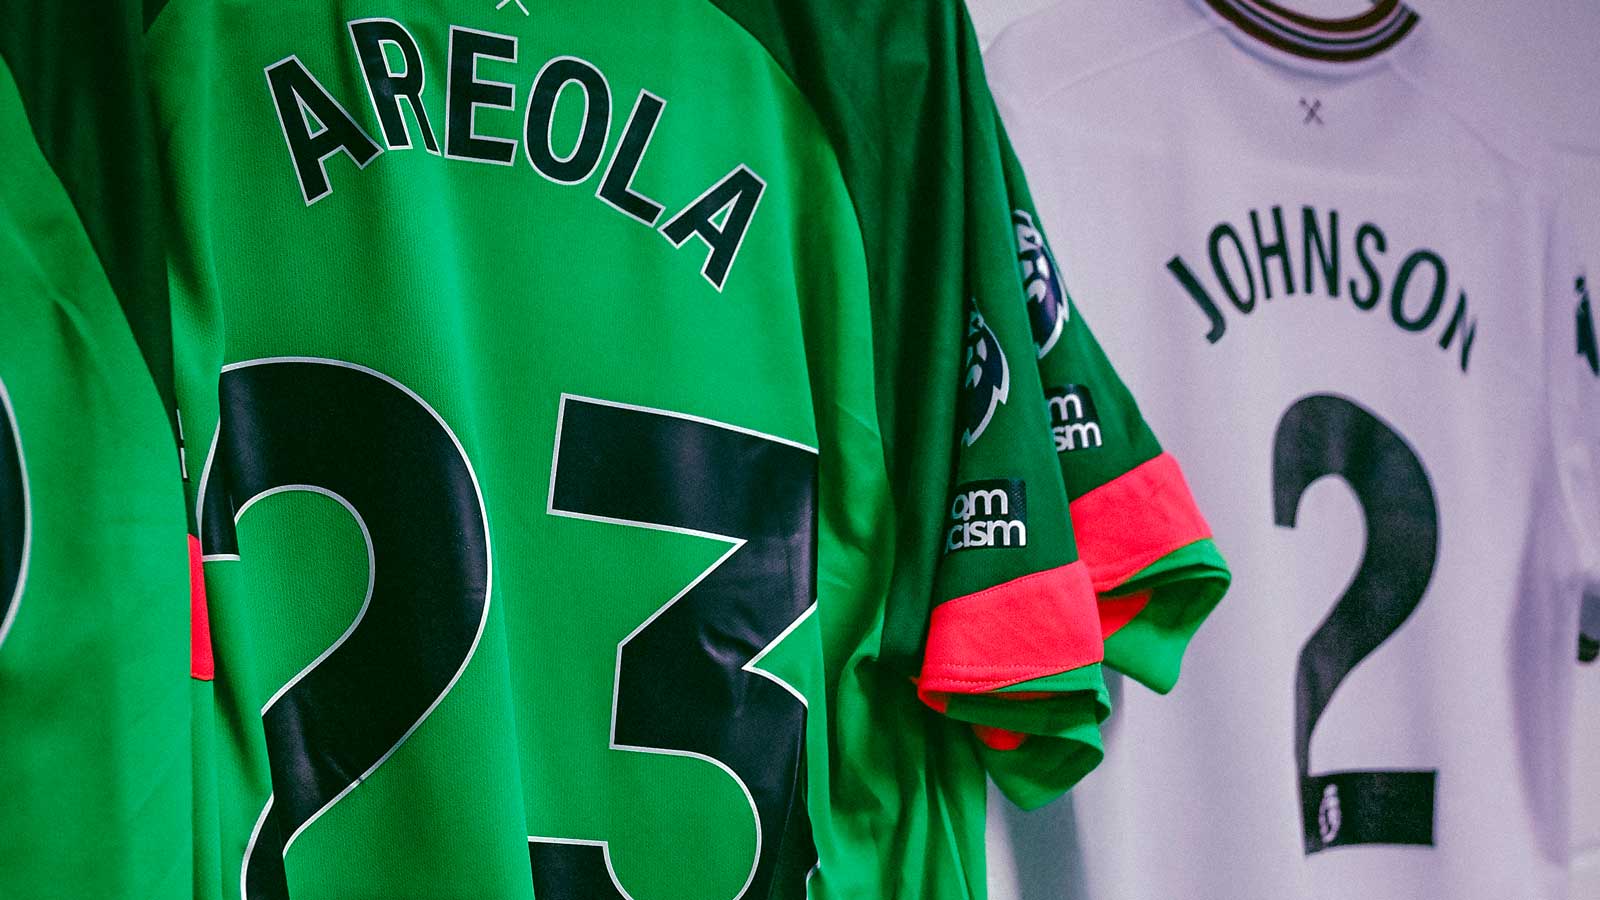 Alphonse Areola's shirt in the dressing room at AFC Bournemouth